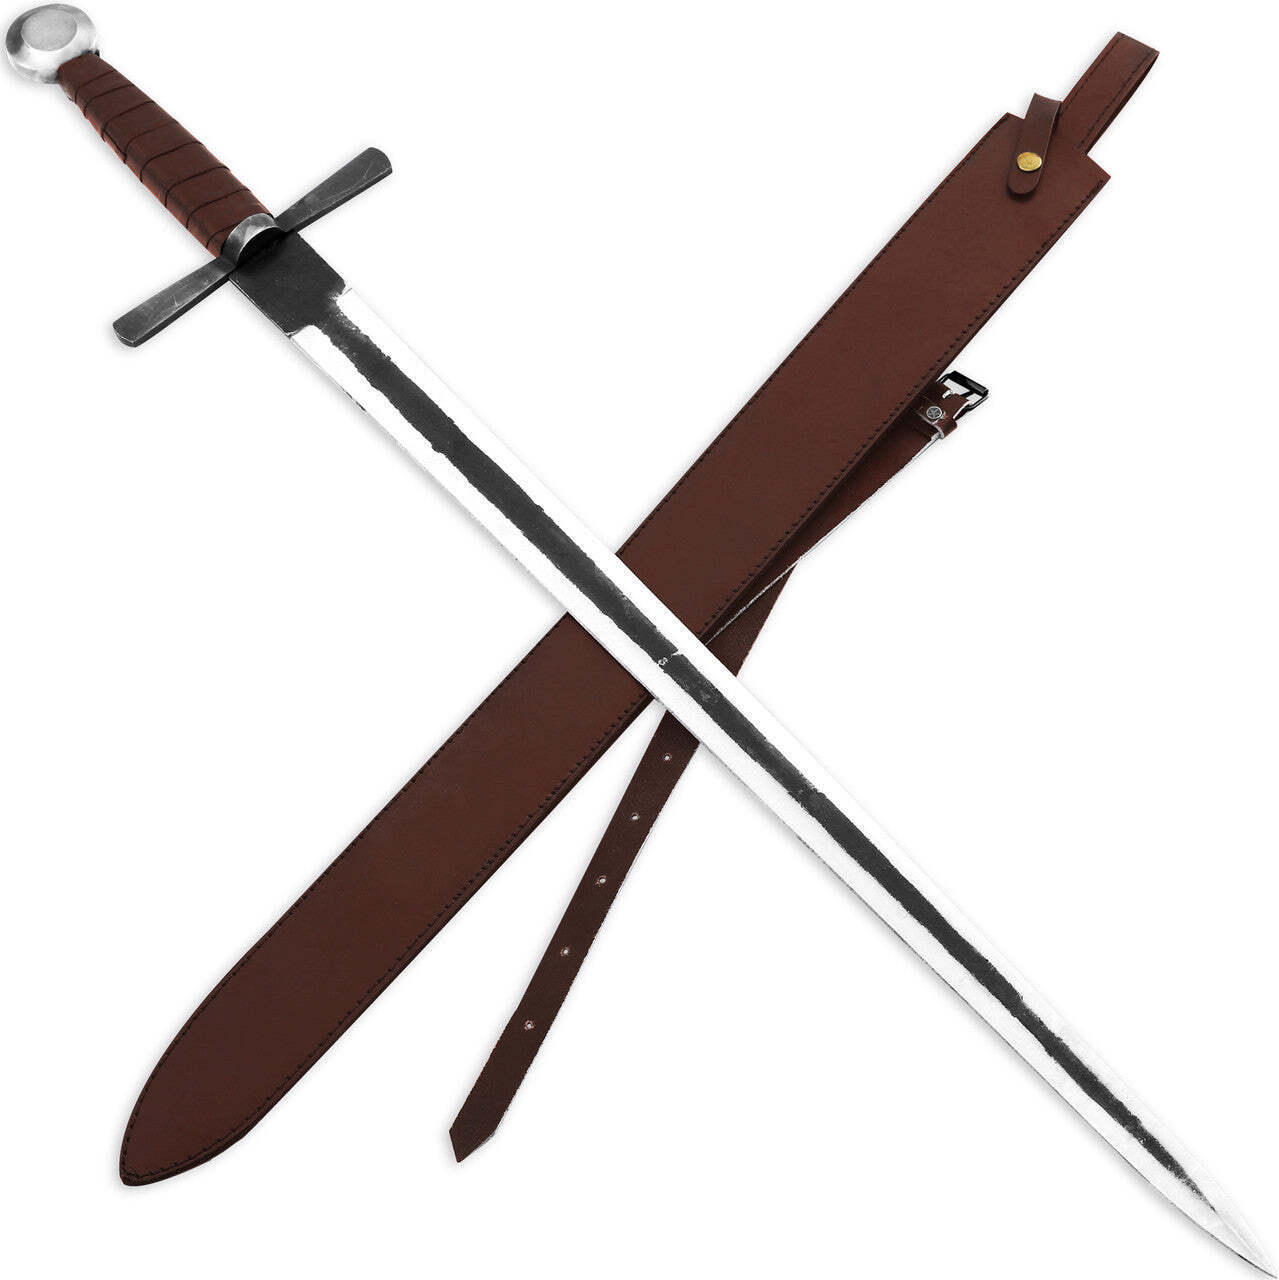 The Royal Enforcer Exquisite Hand-Forged Medieval Knights Sword Elegance Leather